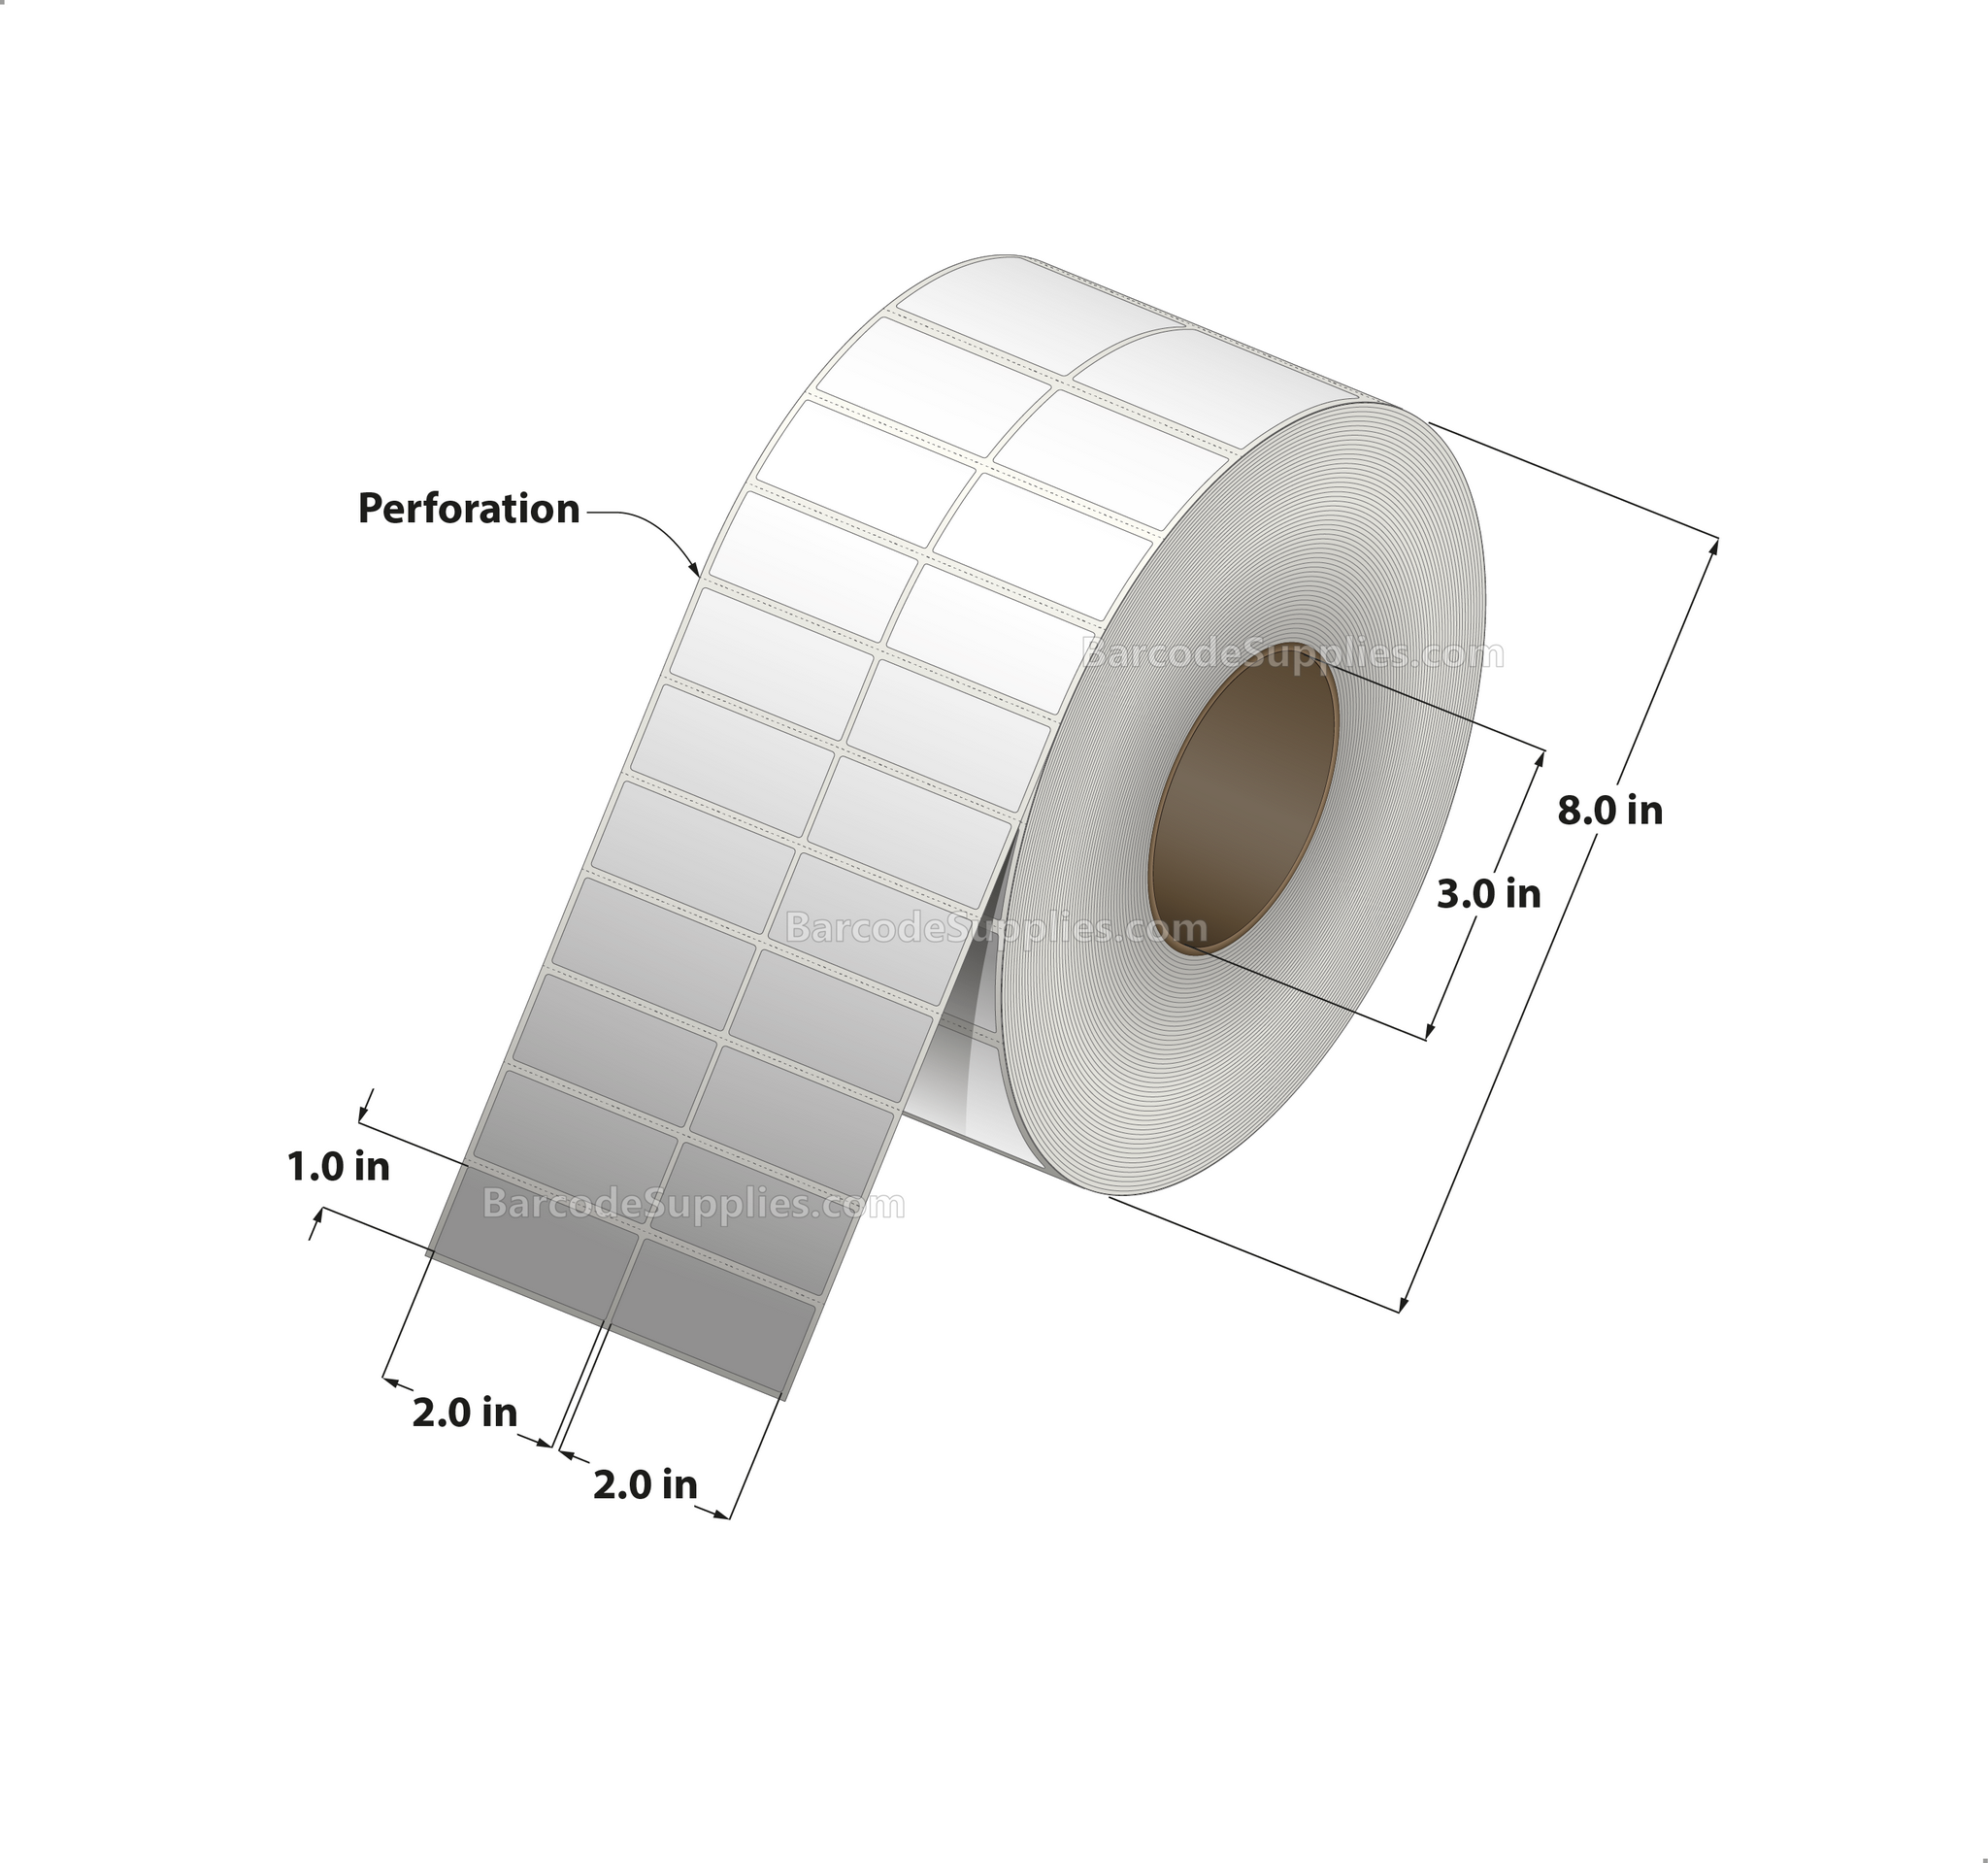 2 x 1 Thermal Transfer White Labels With Permanent Acrylic Adhesive - Perforated - 11000 Labels Per Roll - Carton Of 4 Rolls - 44000 Labels Total - MPN: TH21-2P